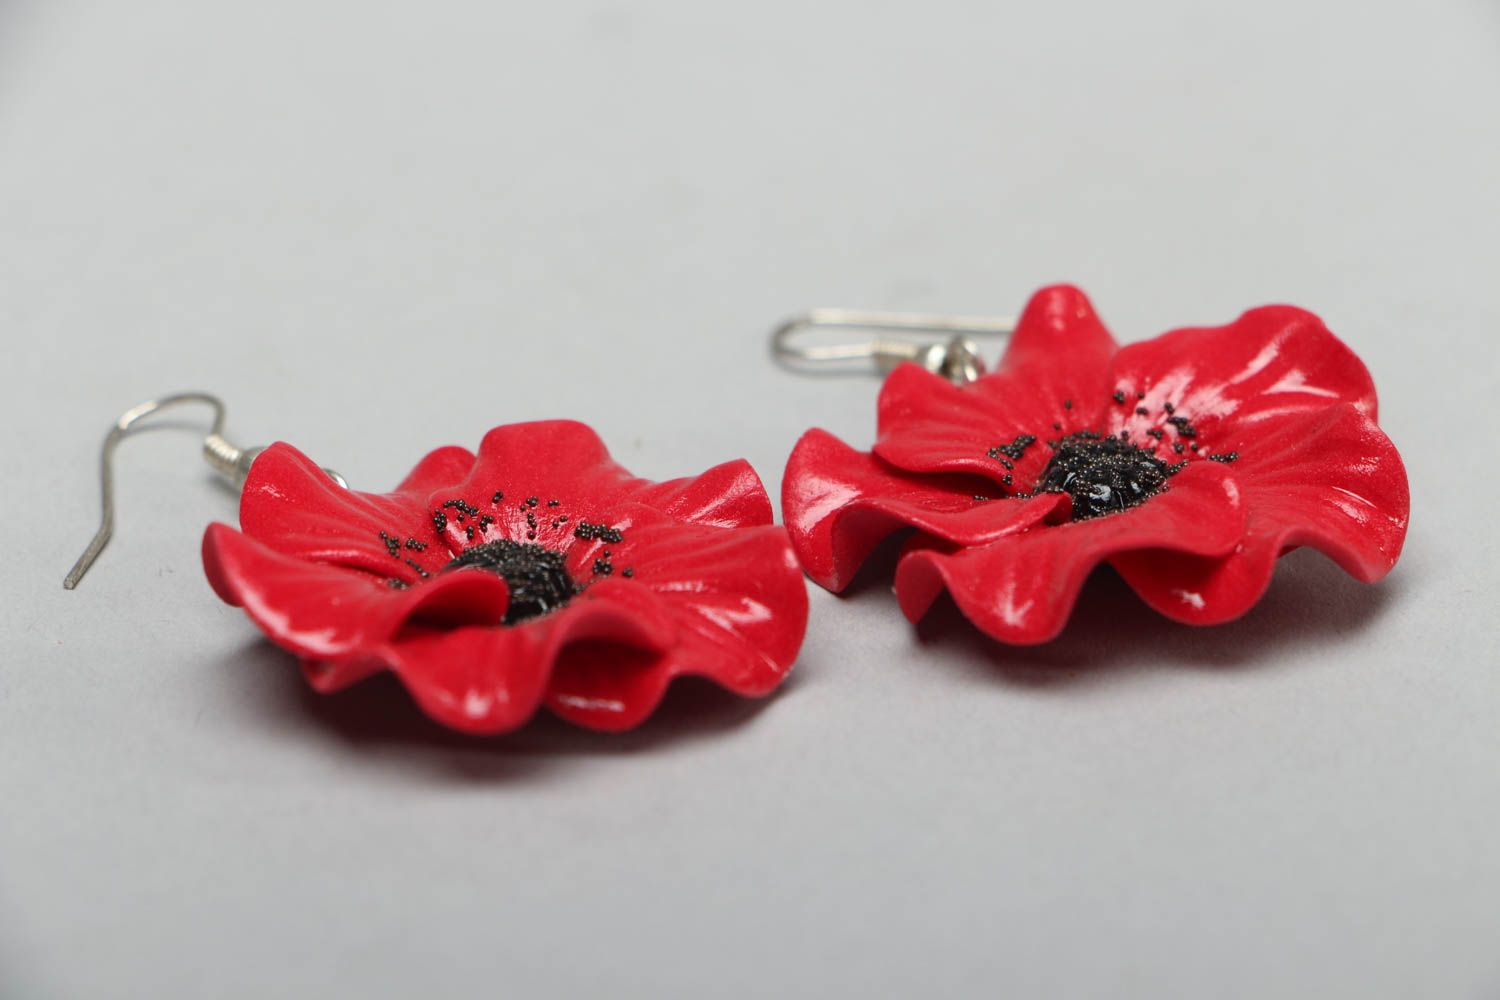 Polymer clay earrings in the shape of red poppies photo 2